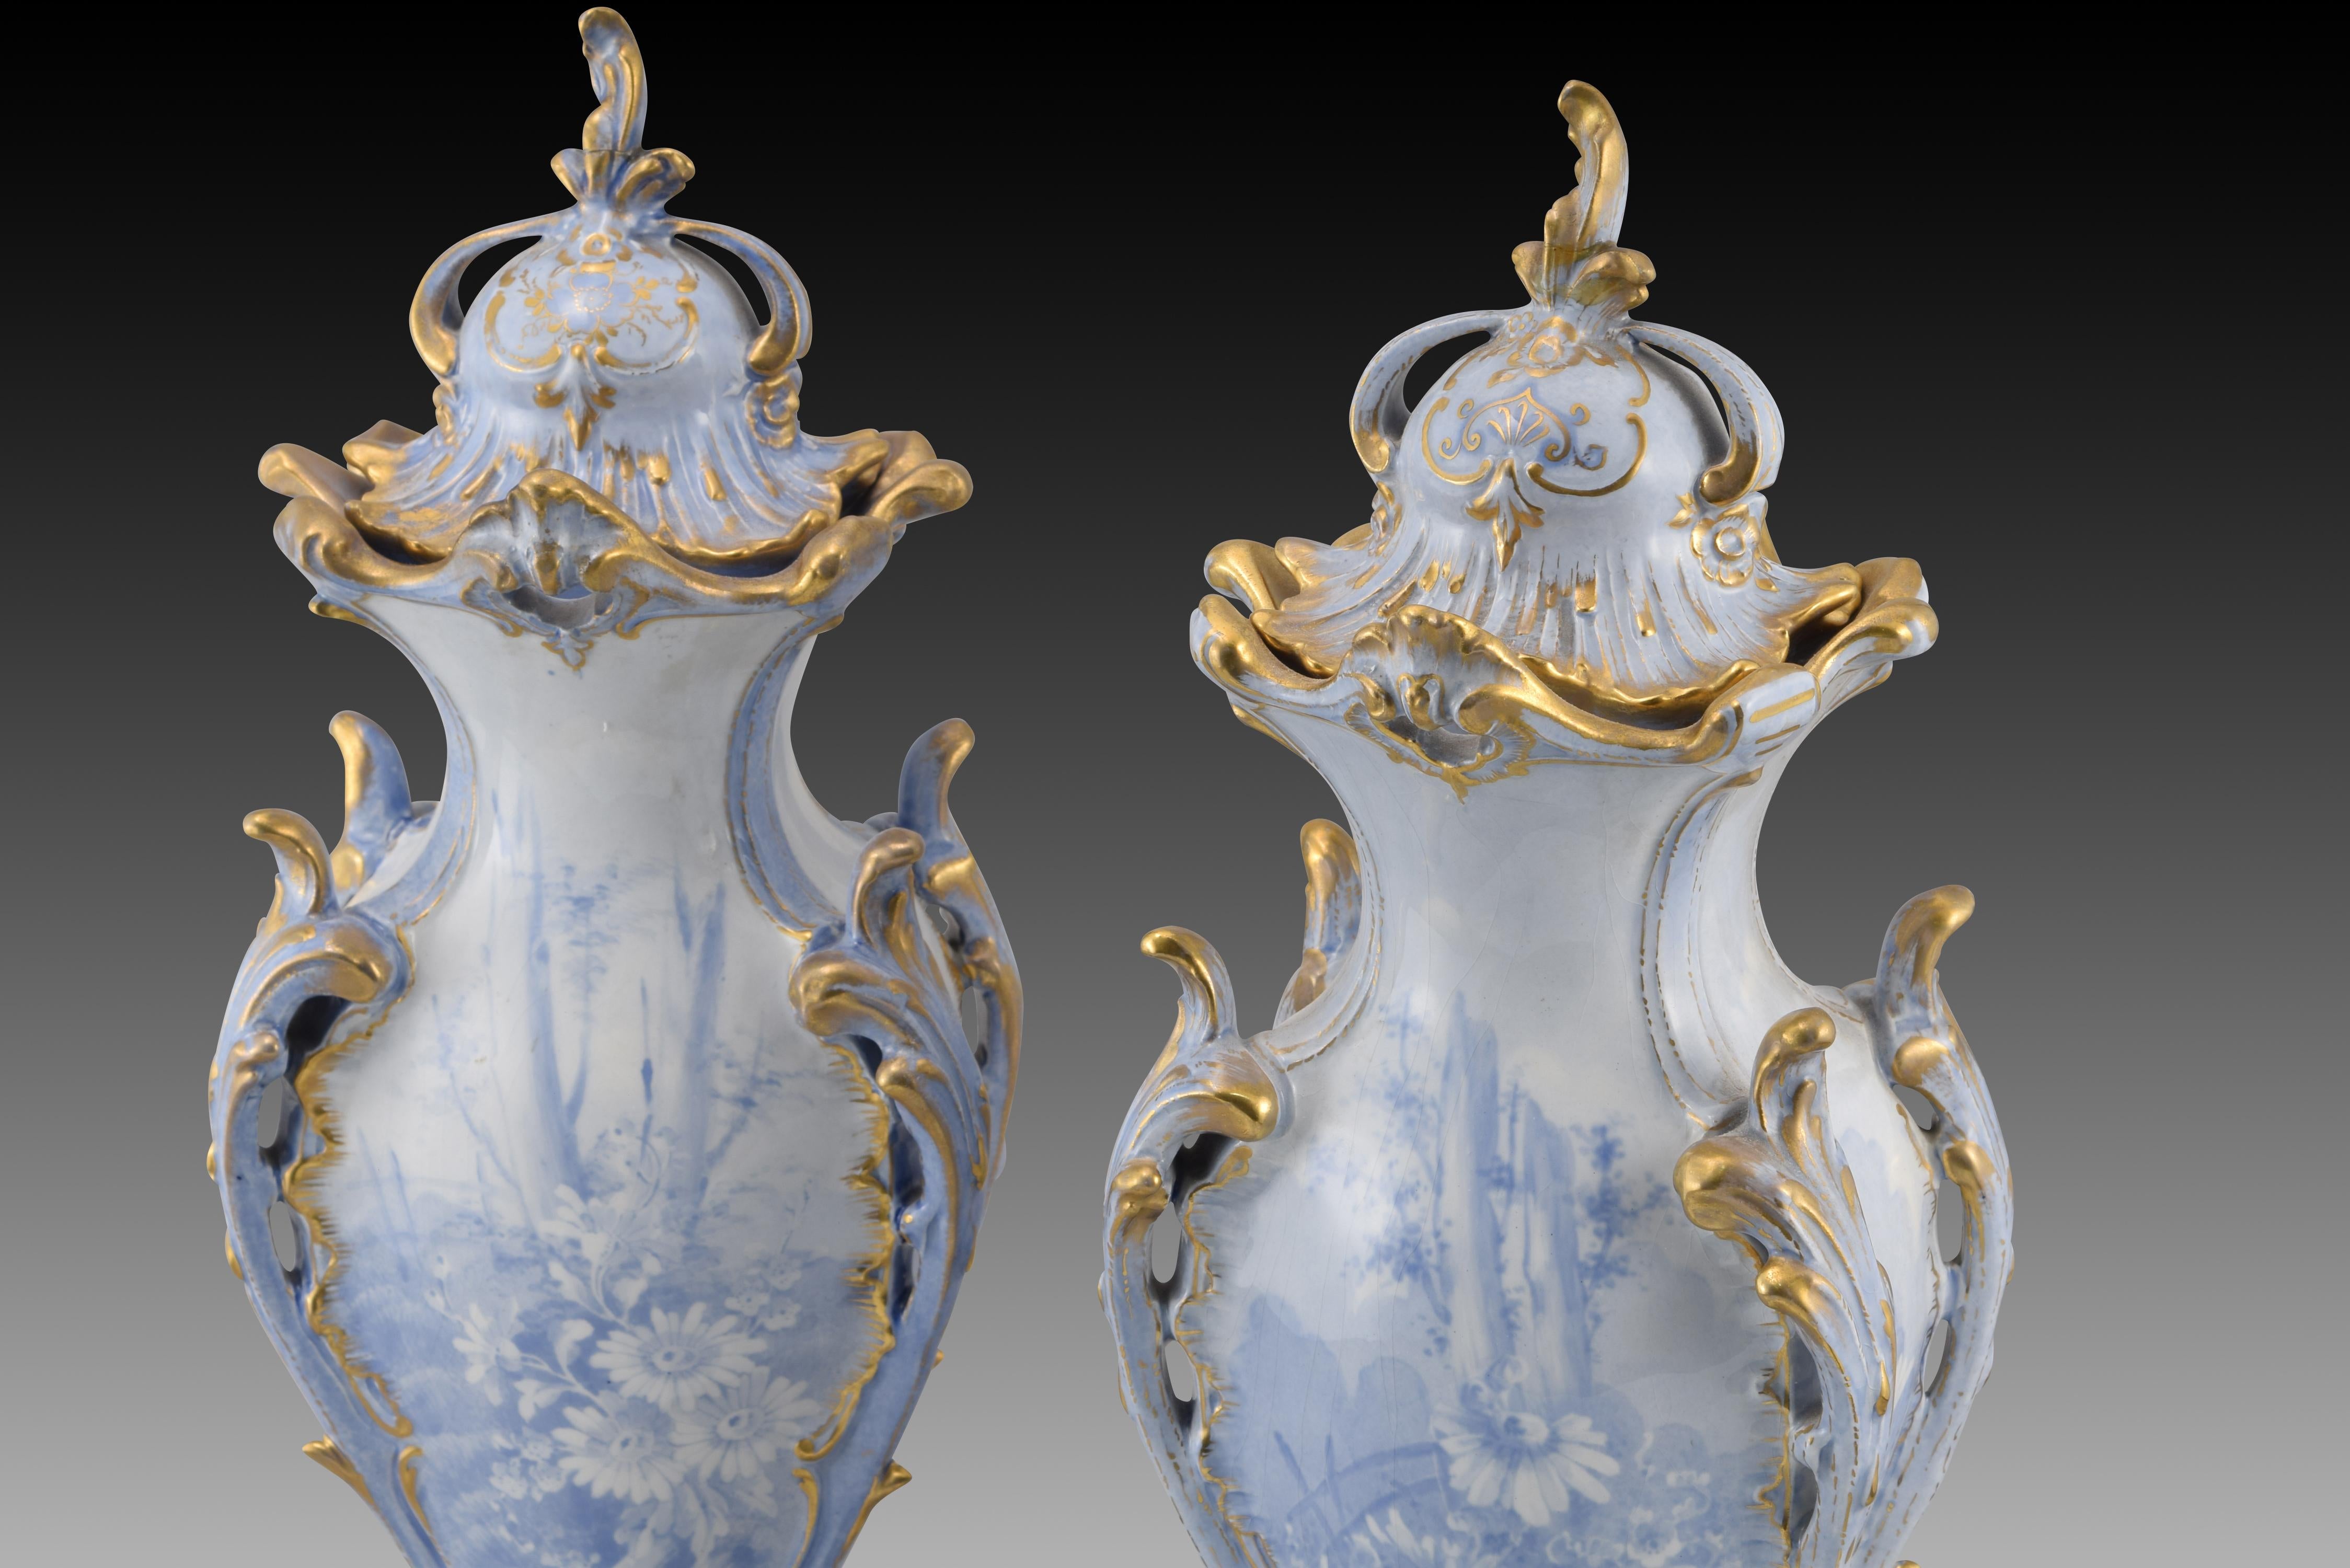 20th Century Pair of vases with lids. Enameled porcelain. Royal Bonn, Germany, 20th century